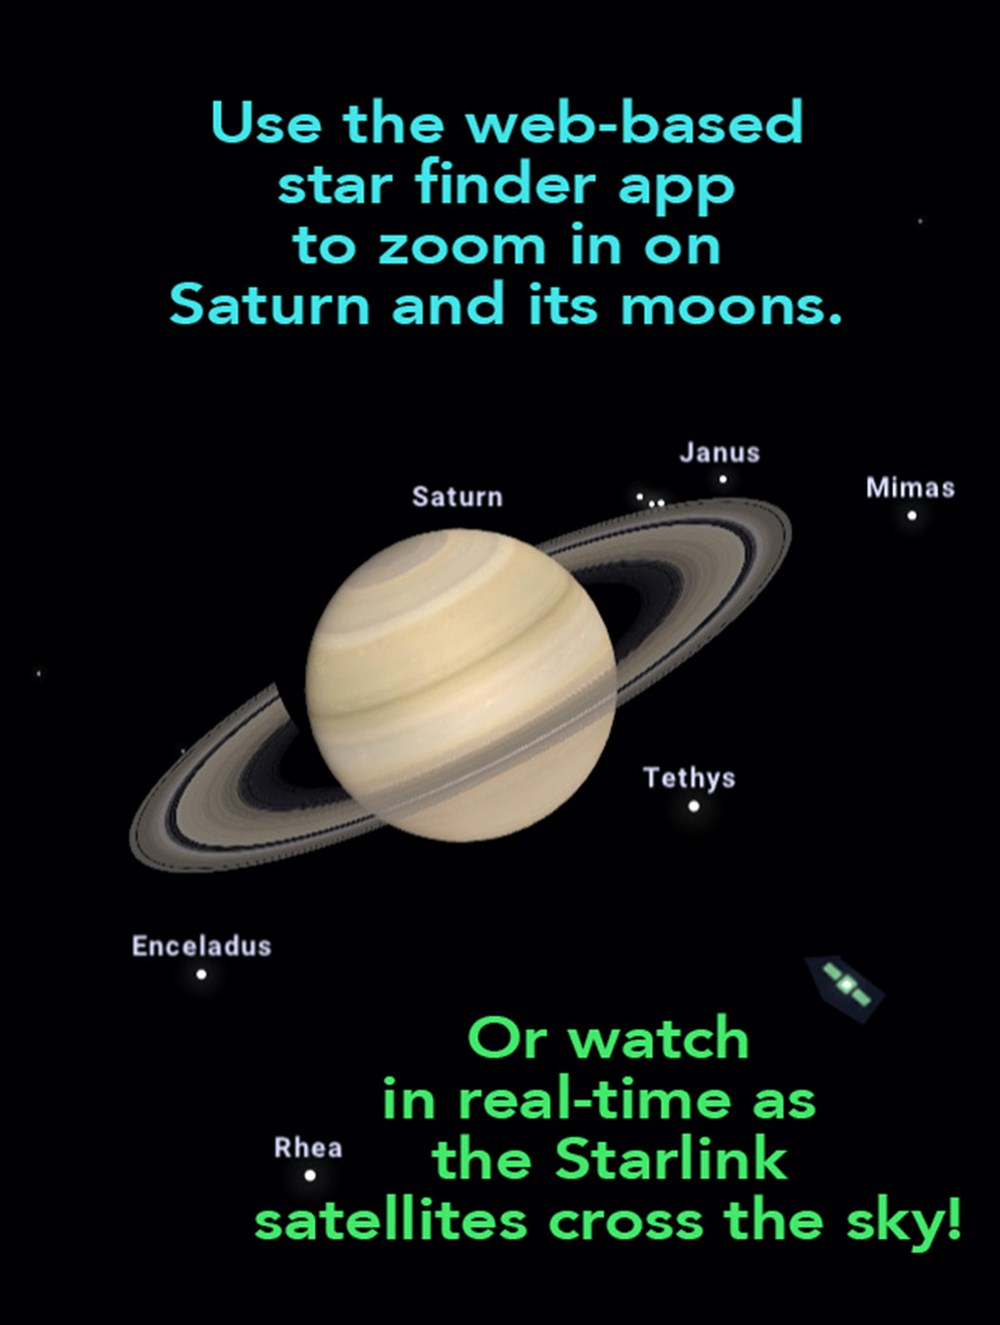 Online Science Discovery Planets